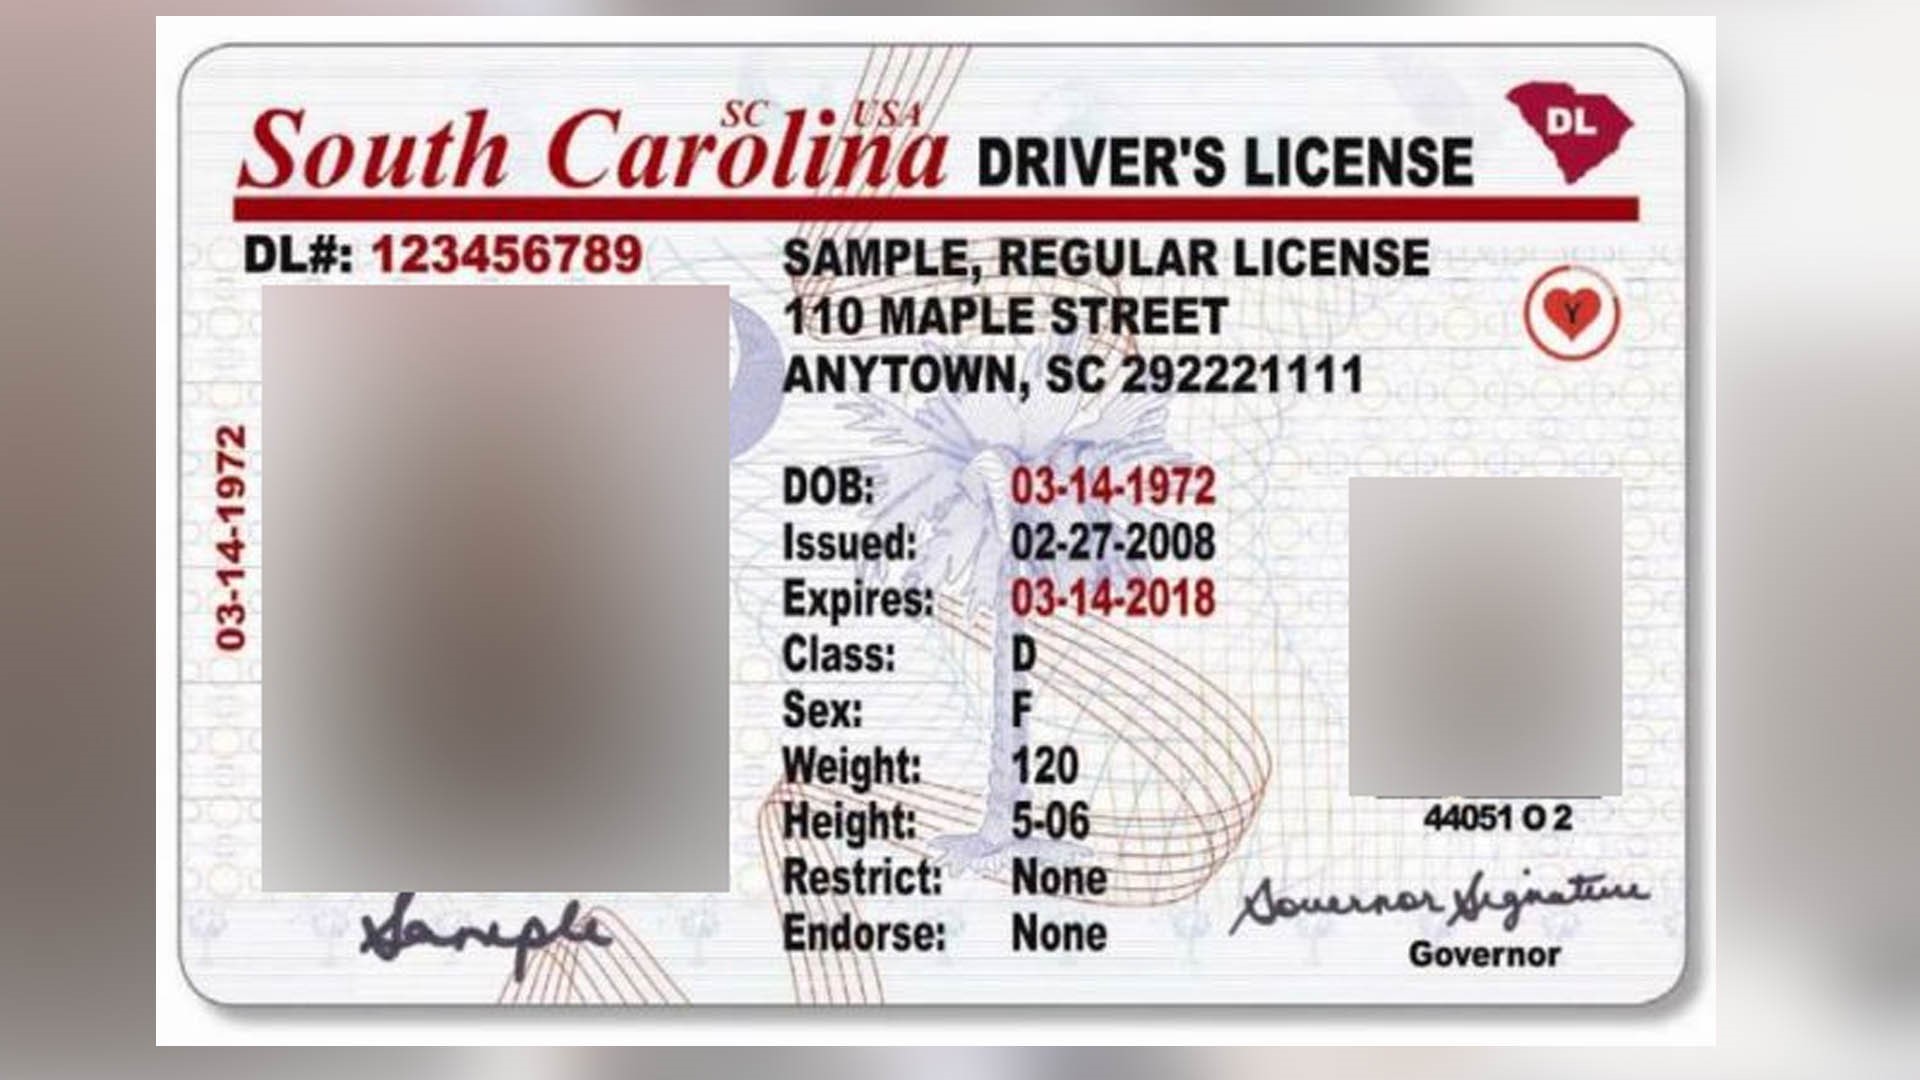 Online Driver's License Renewal Now Available for Most SC Drivers